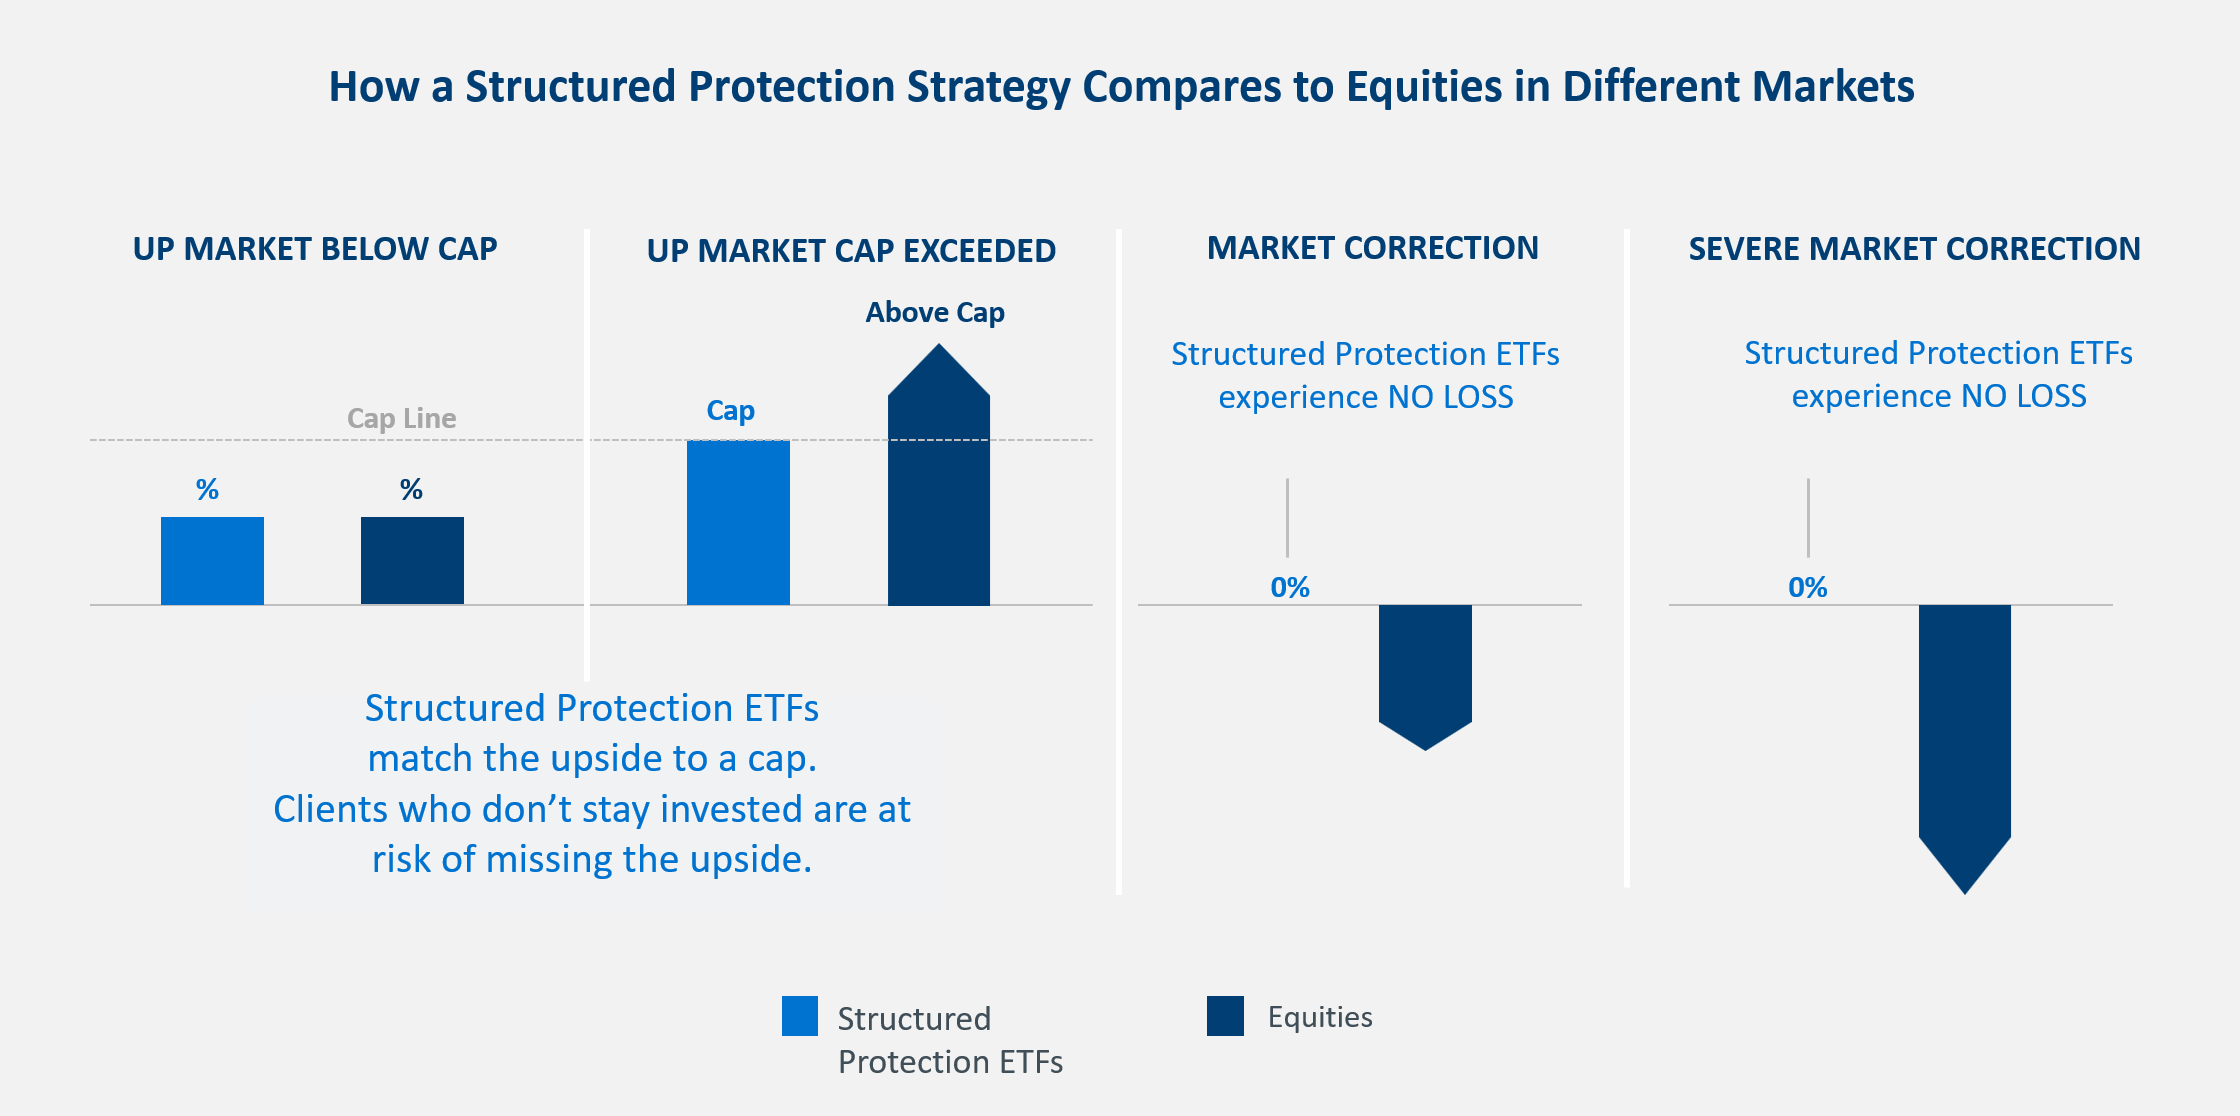 How a Structured Protection Strategy Compares to Equities in Different Markets